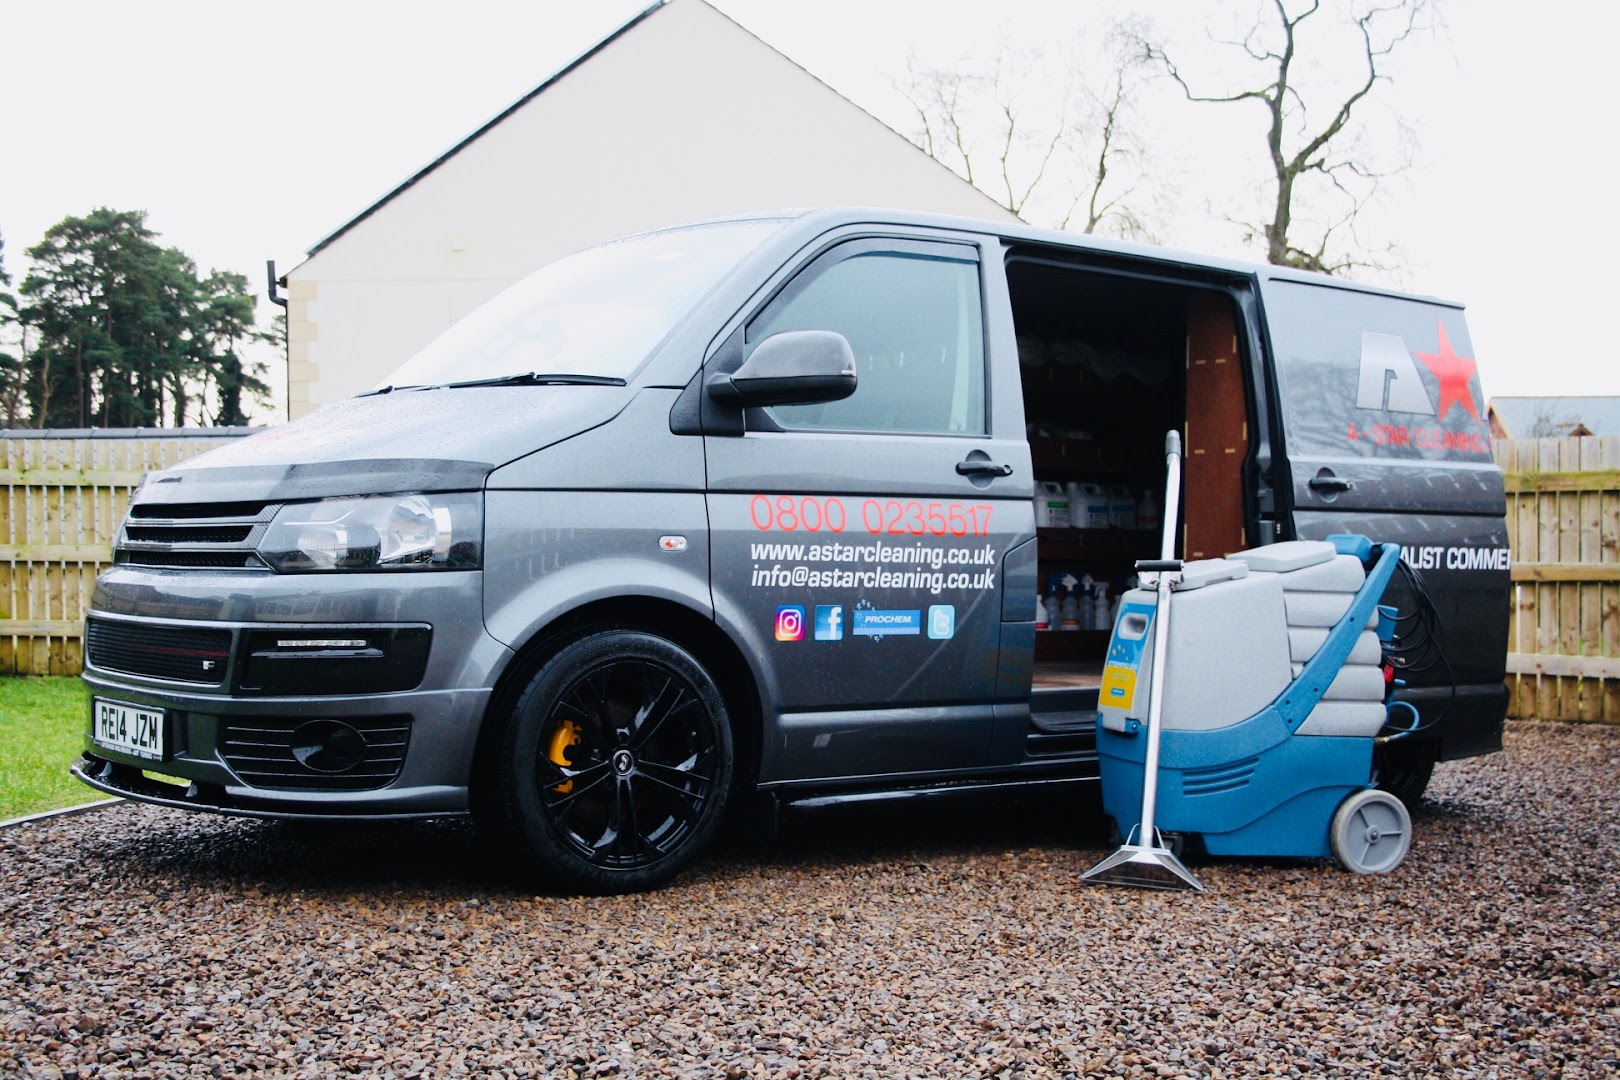 A Star Cleaning Services Ltd - Carpet & Upholstery Cleaners - Carlisle, Cumbria